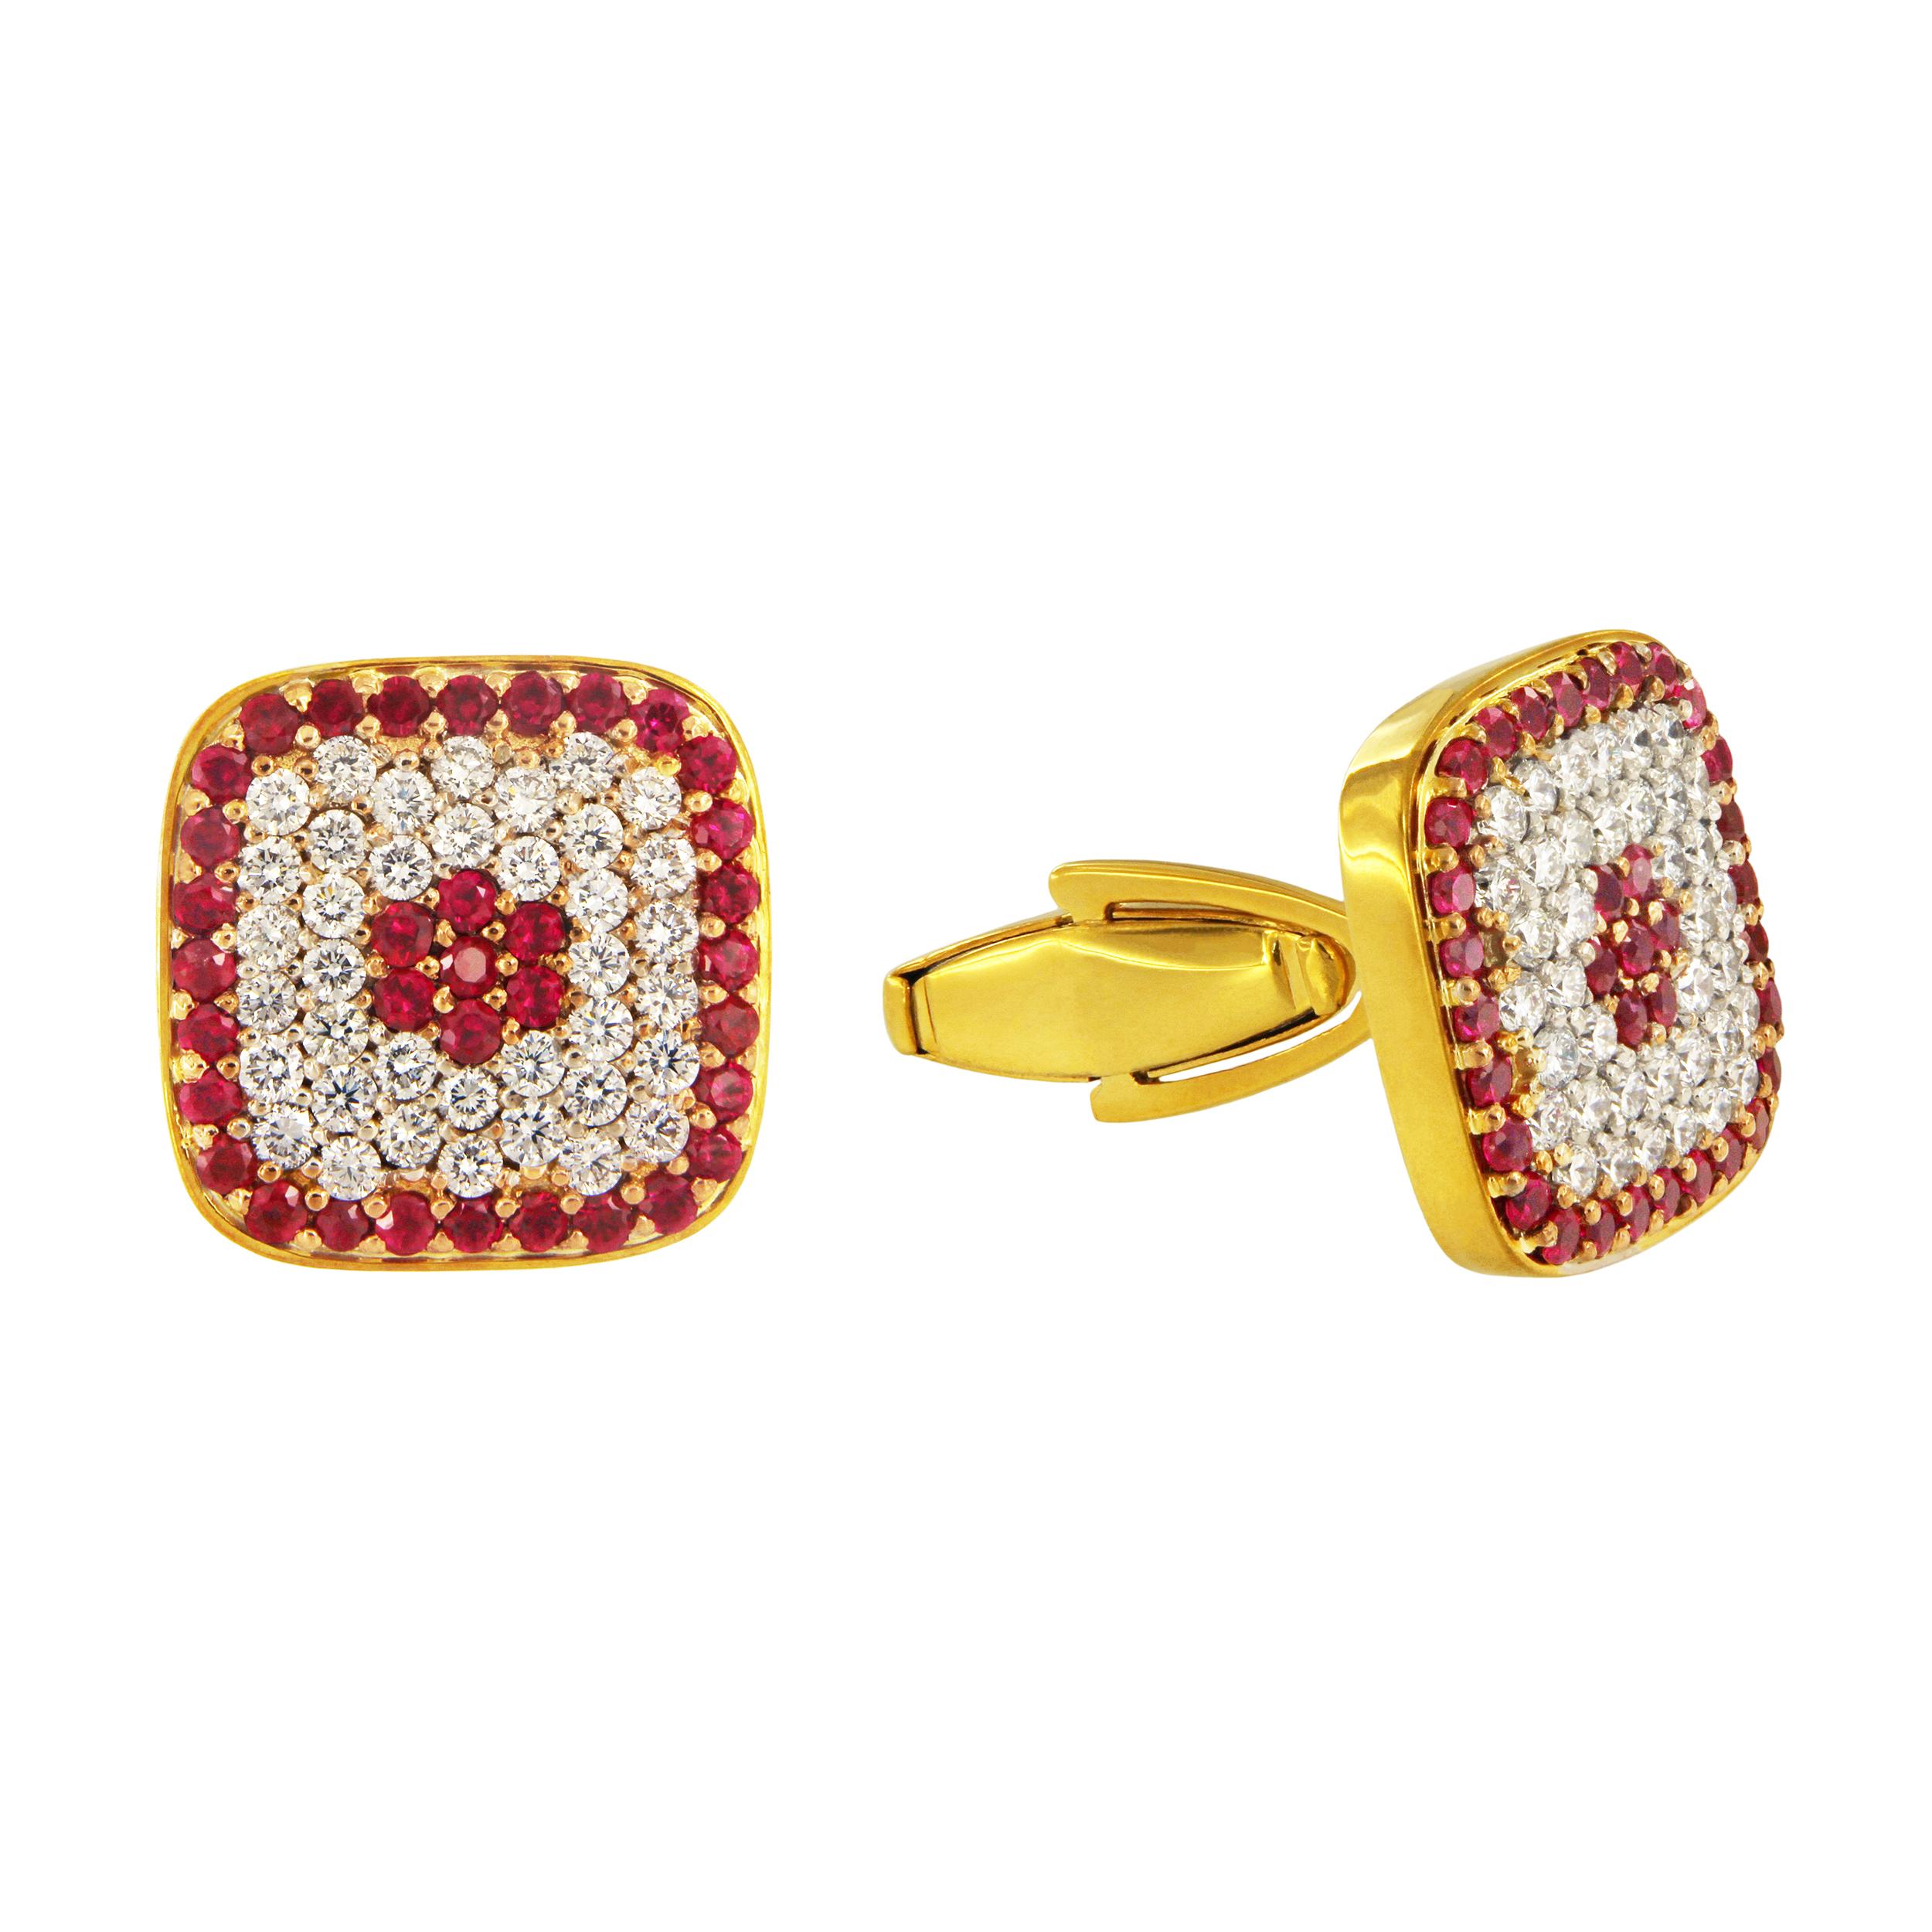 Luxury Rubies & Diamond Cufflinks in Yellow Gold In New Condition For Sale In New York, NY